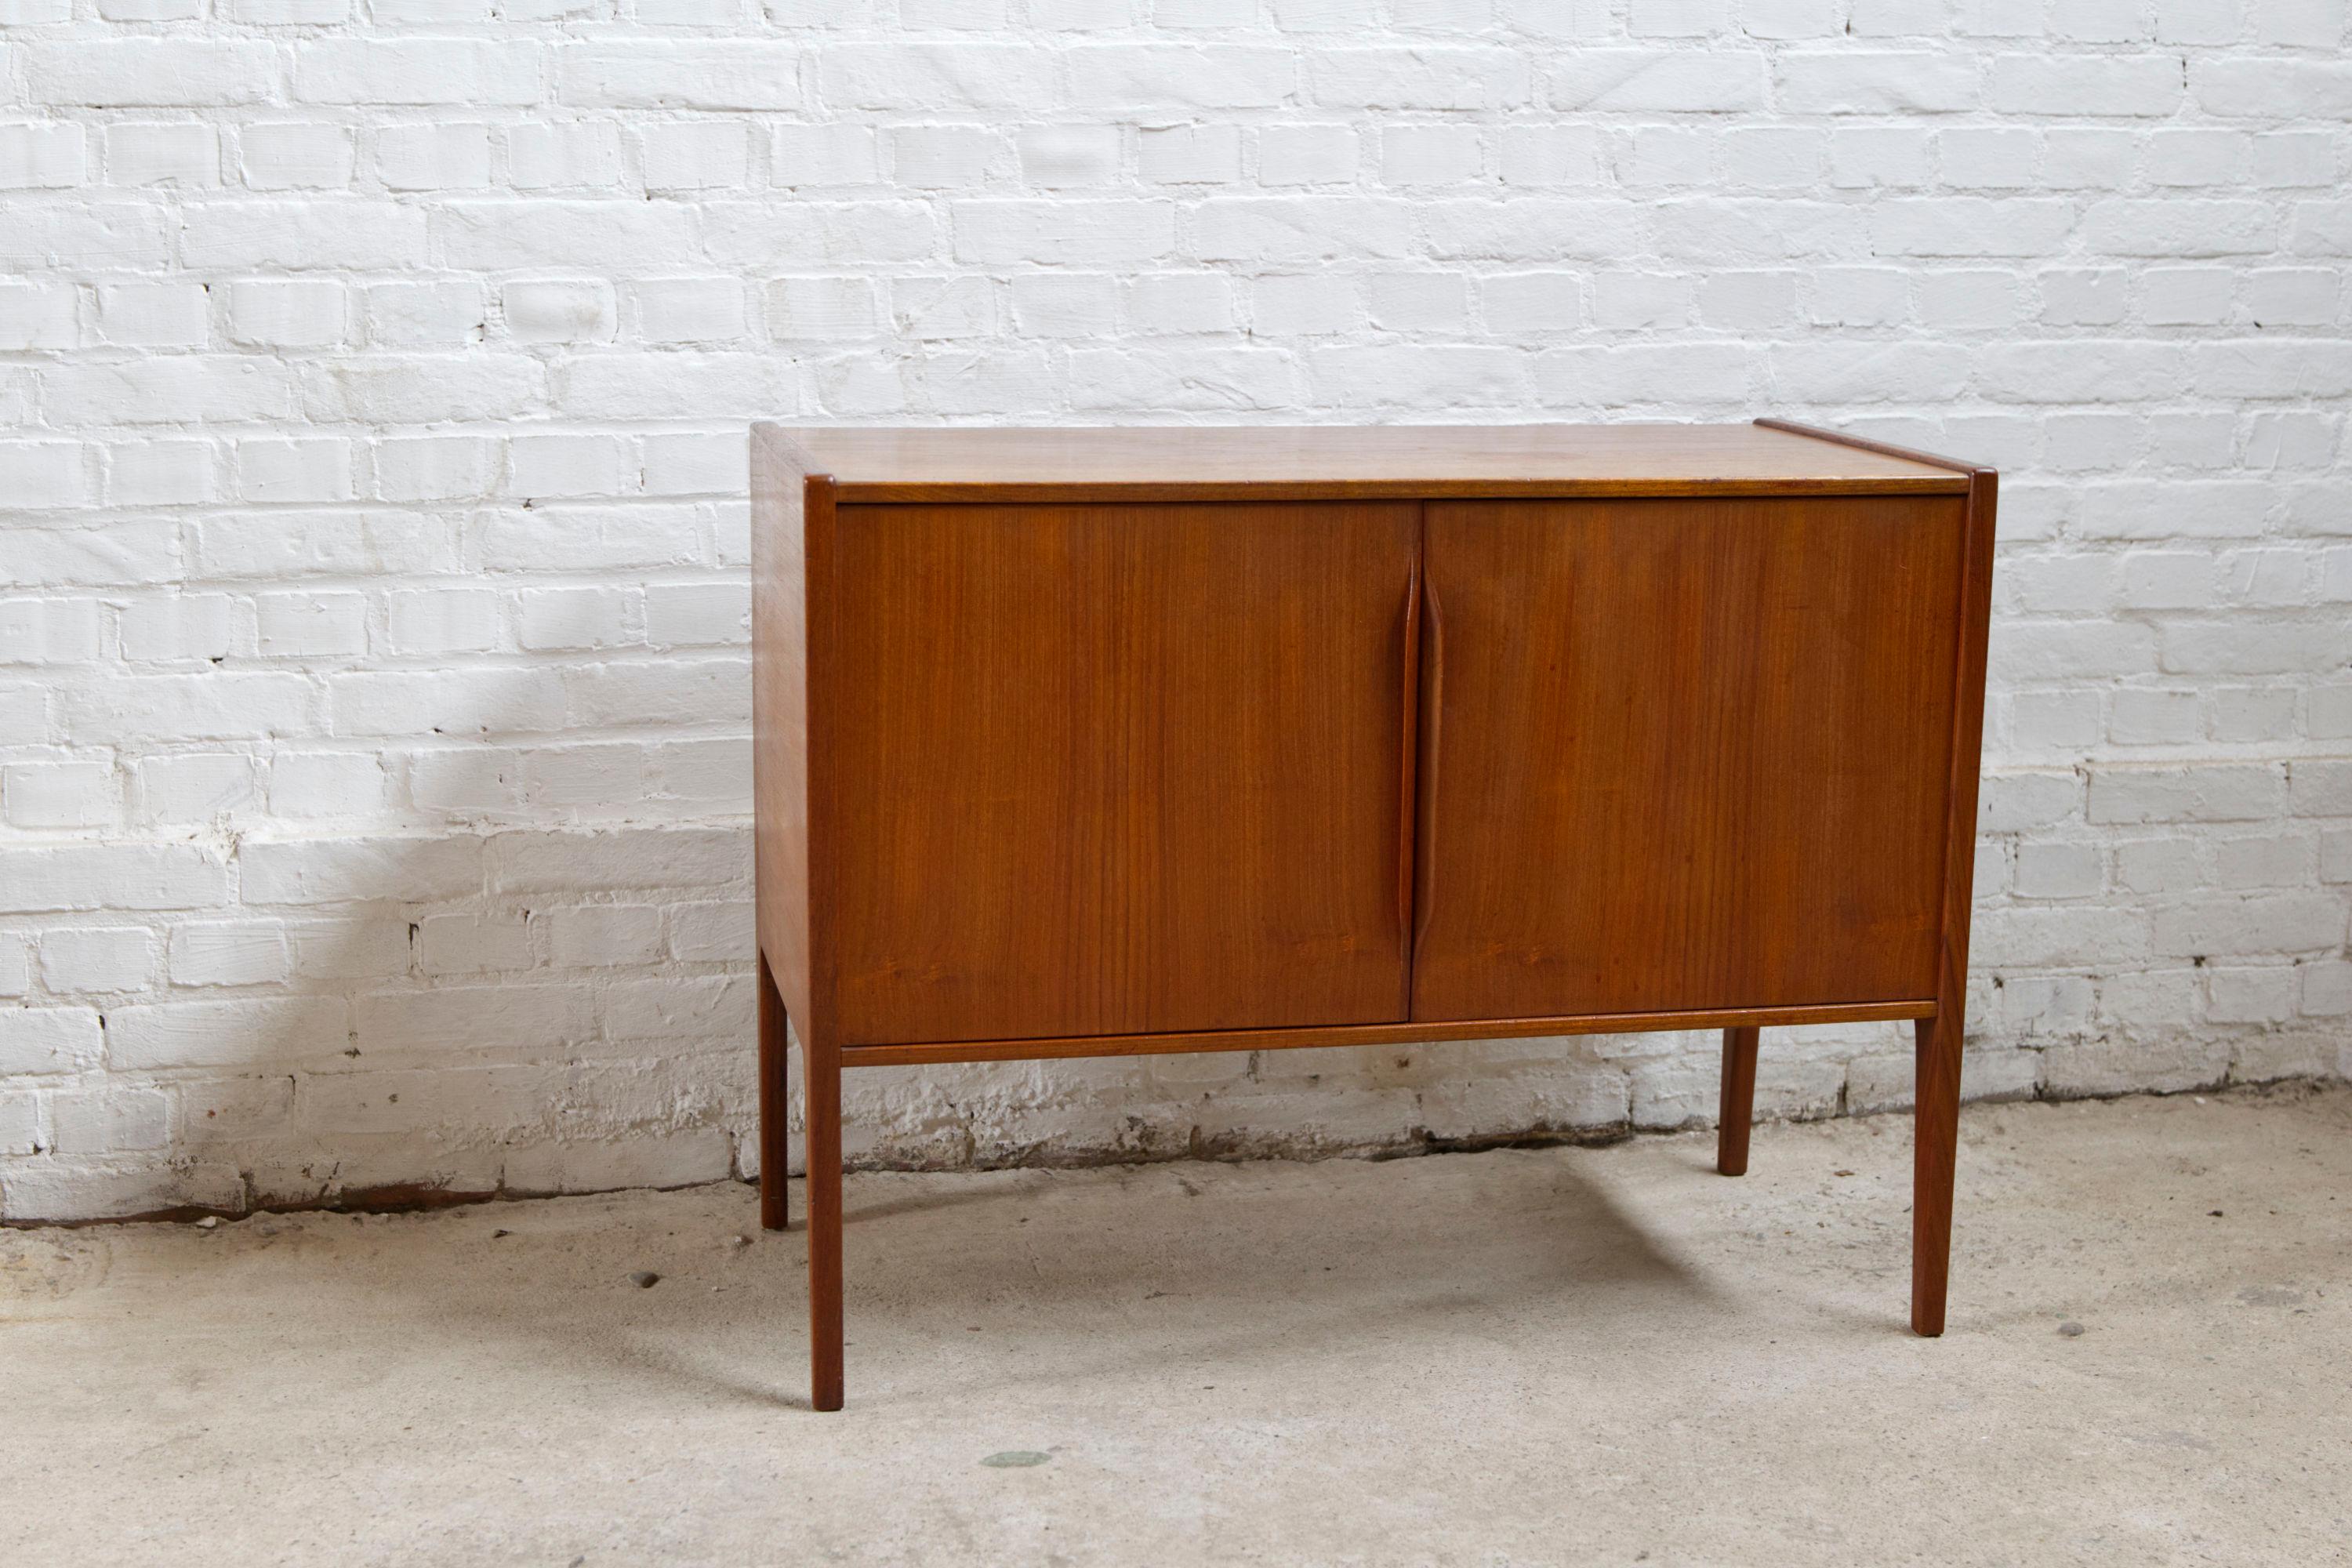 This small cabinet designed by Kai Kristiansen and manufactured by Aksel Kjersgaard in Denmark in the 1960s. This model 34 is very rare and a great example of the top quality Aksel Kjersgaard produced for Kai Kristiansen. The legs continuing up the